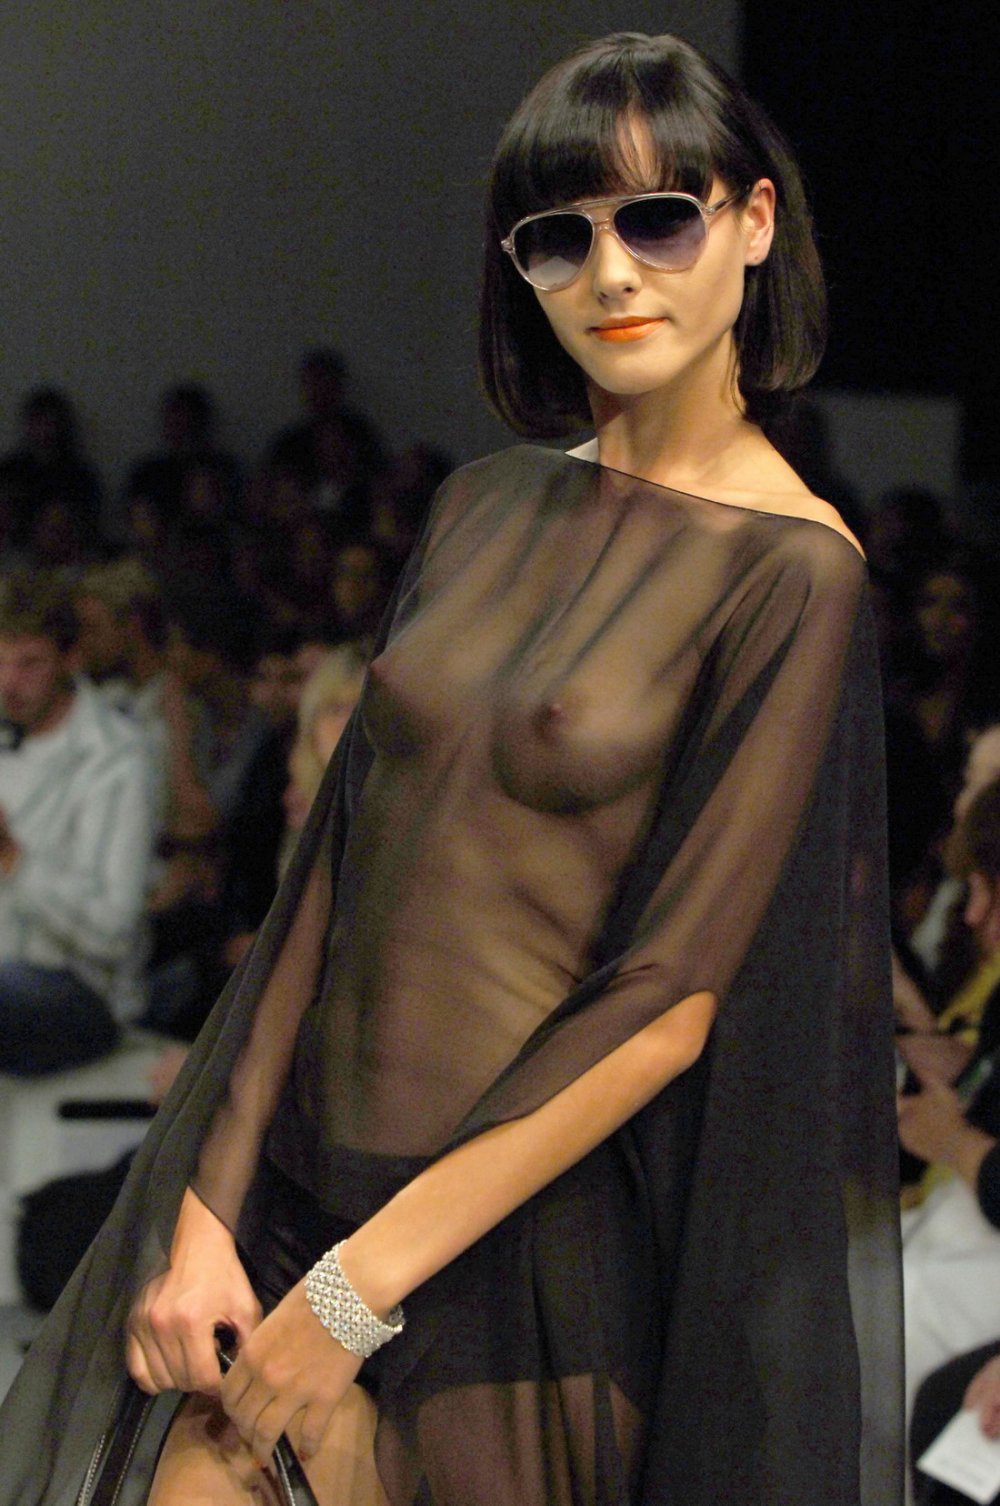 Naked on the Catwalk